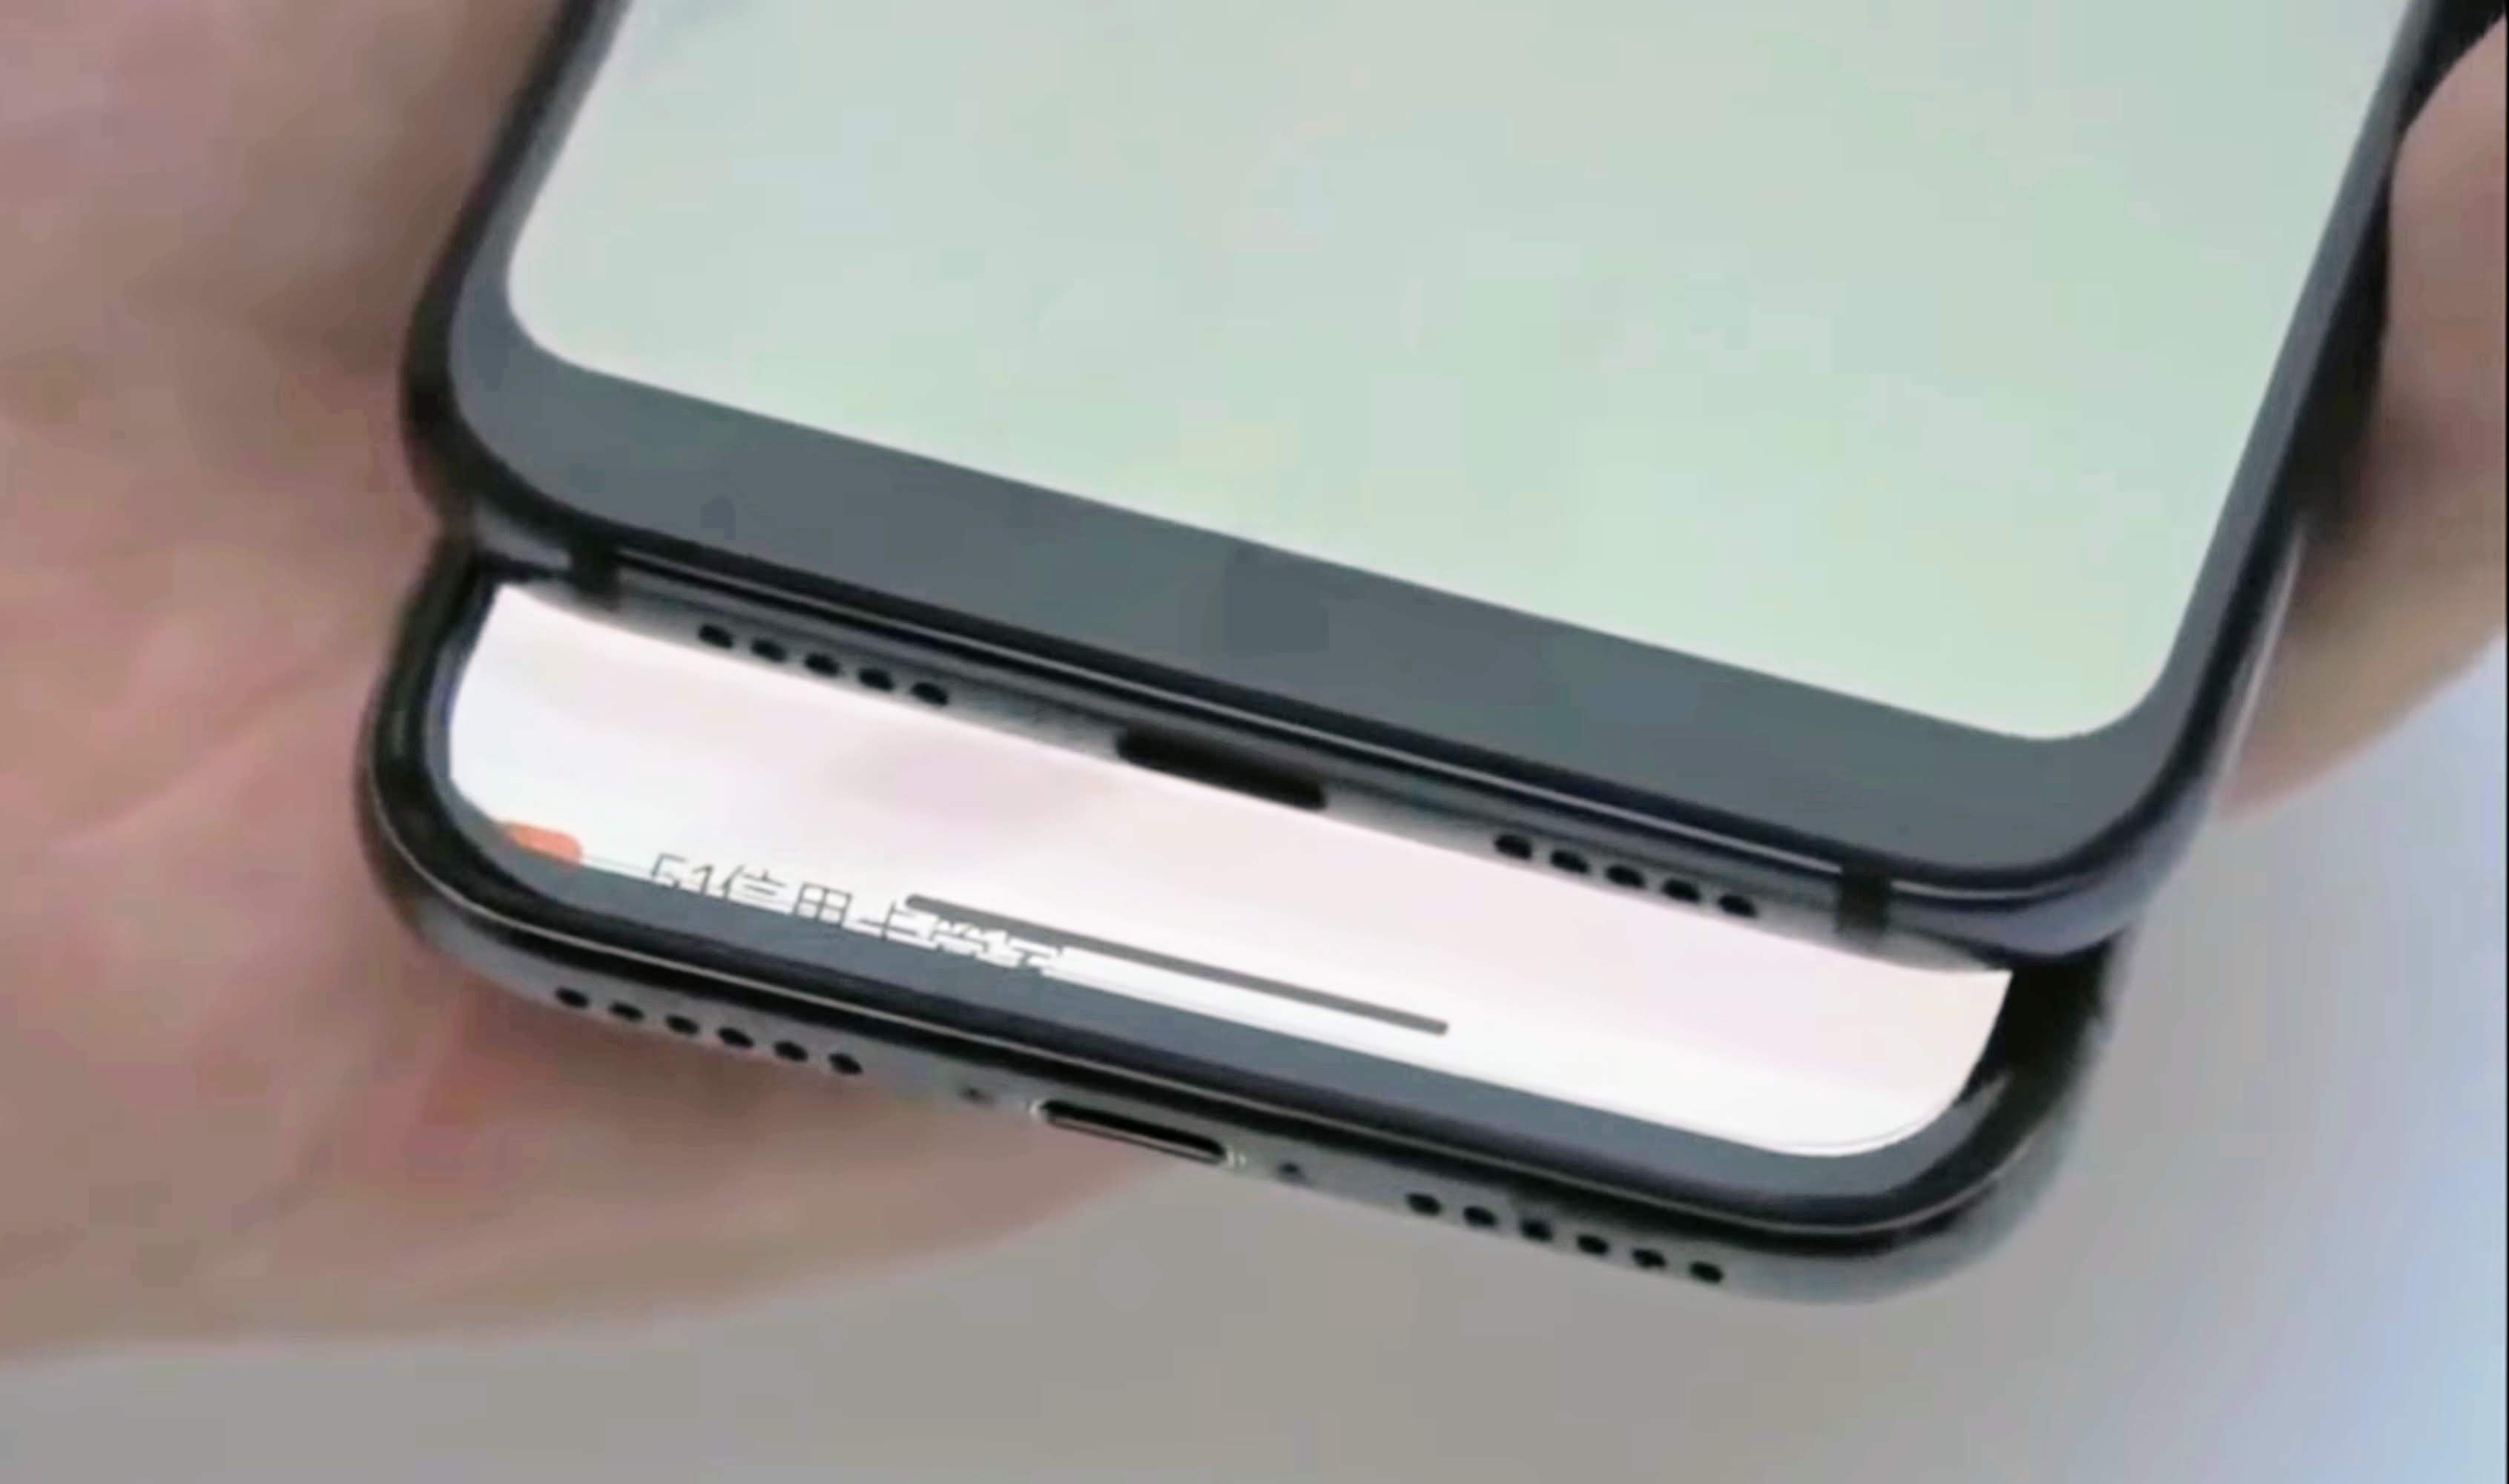 The Xiaomi Mi 8 explorer edition and the iPhone X on top of each other and showing the speaker grill.